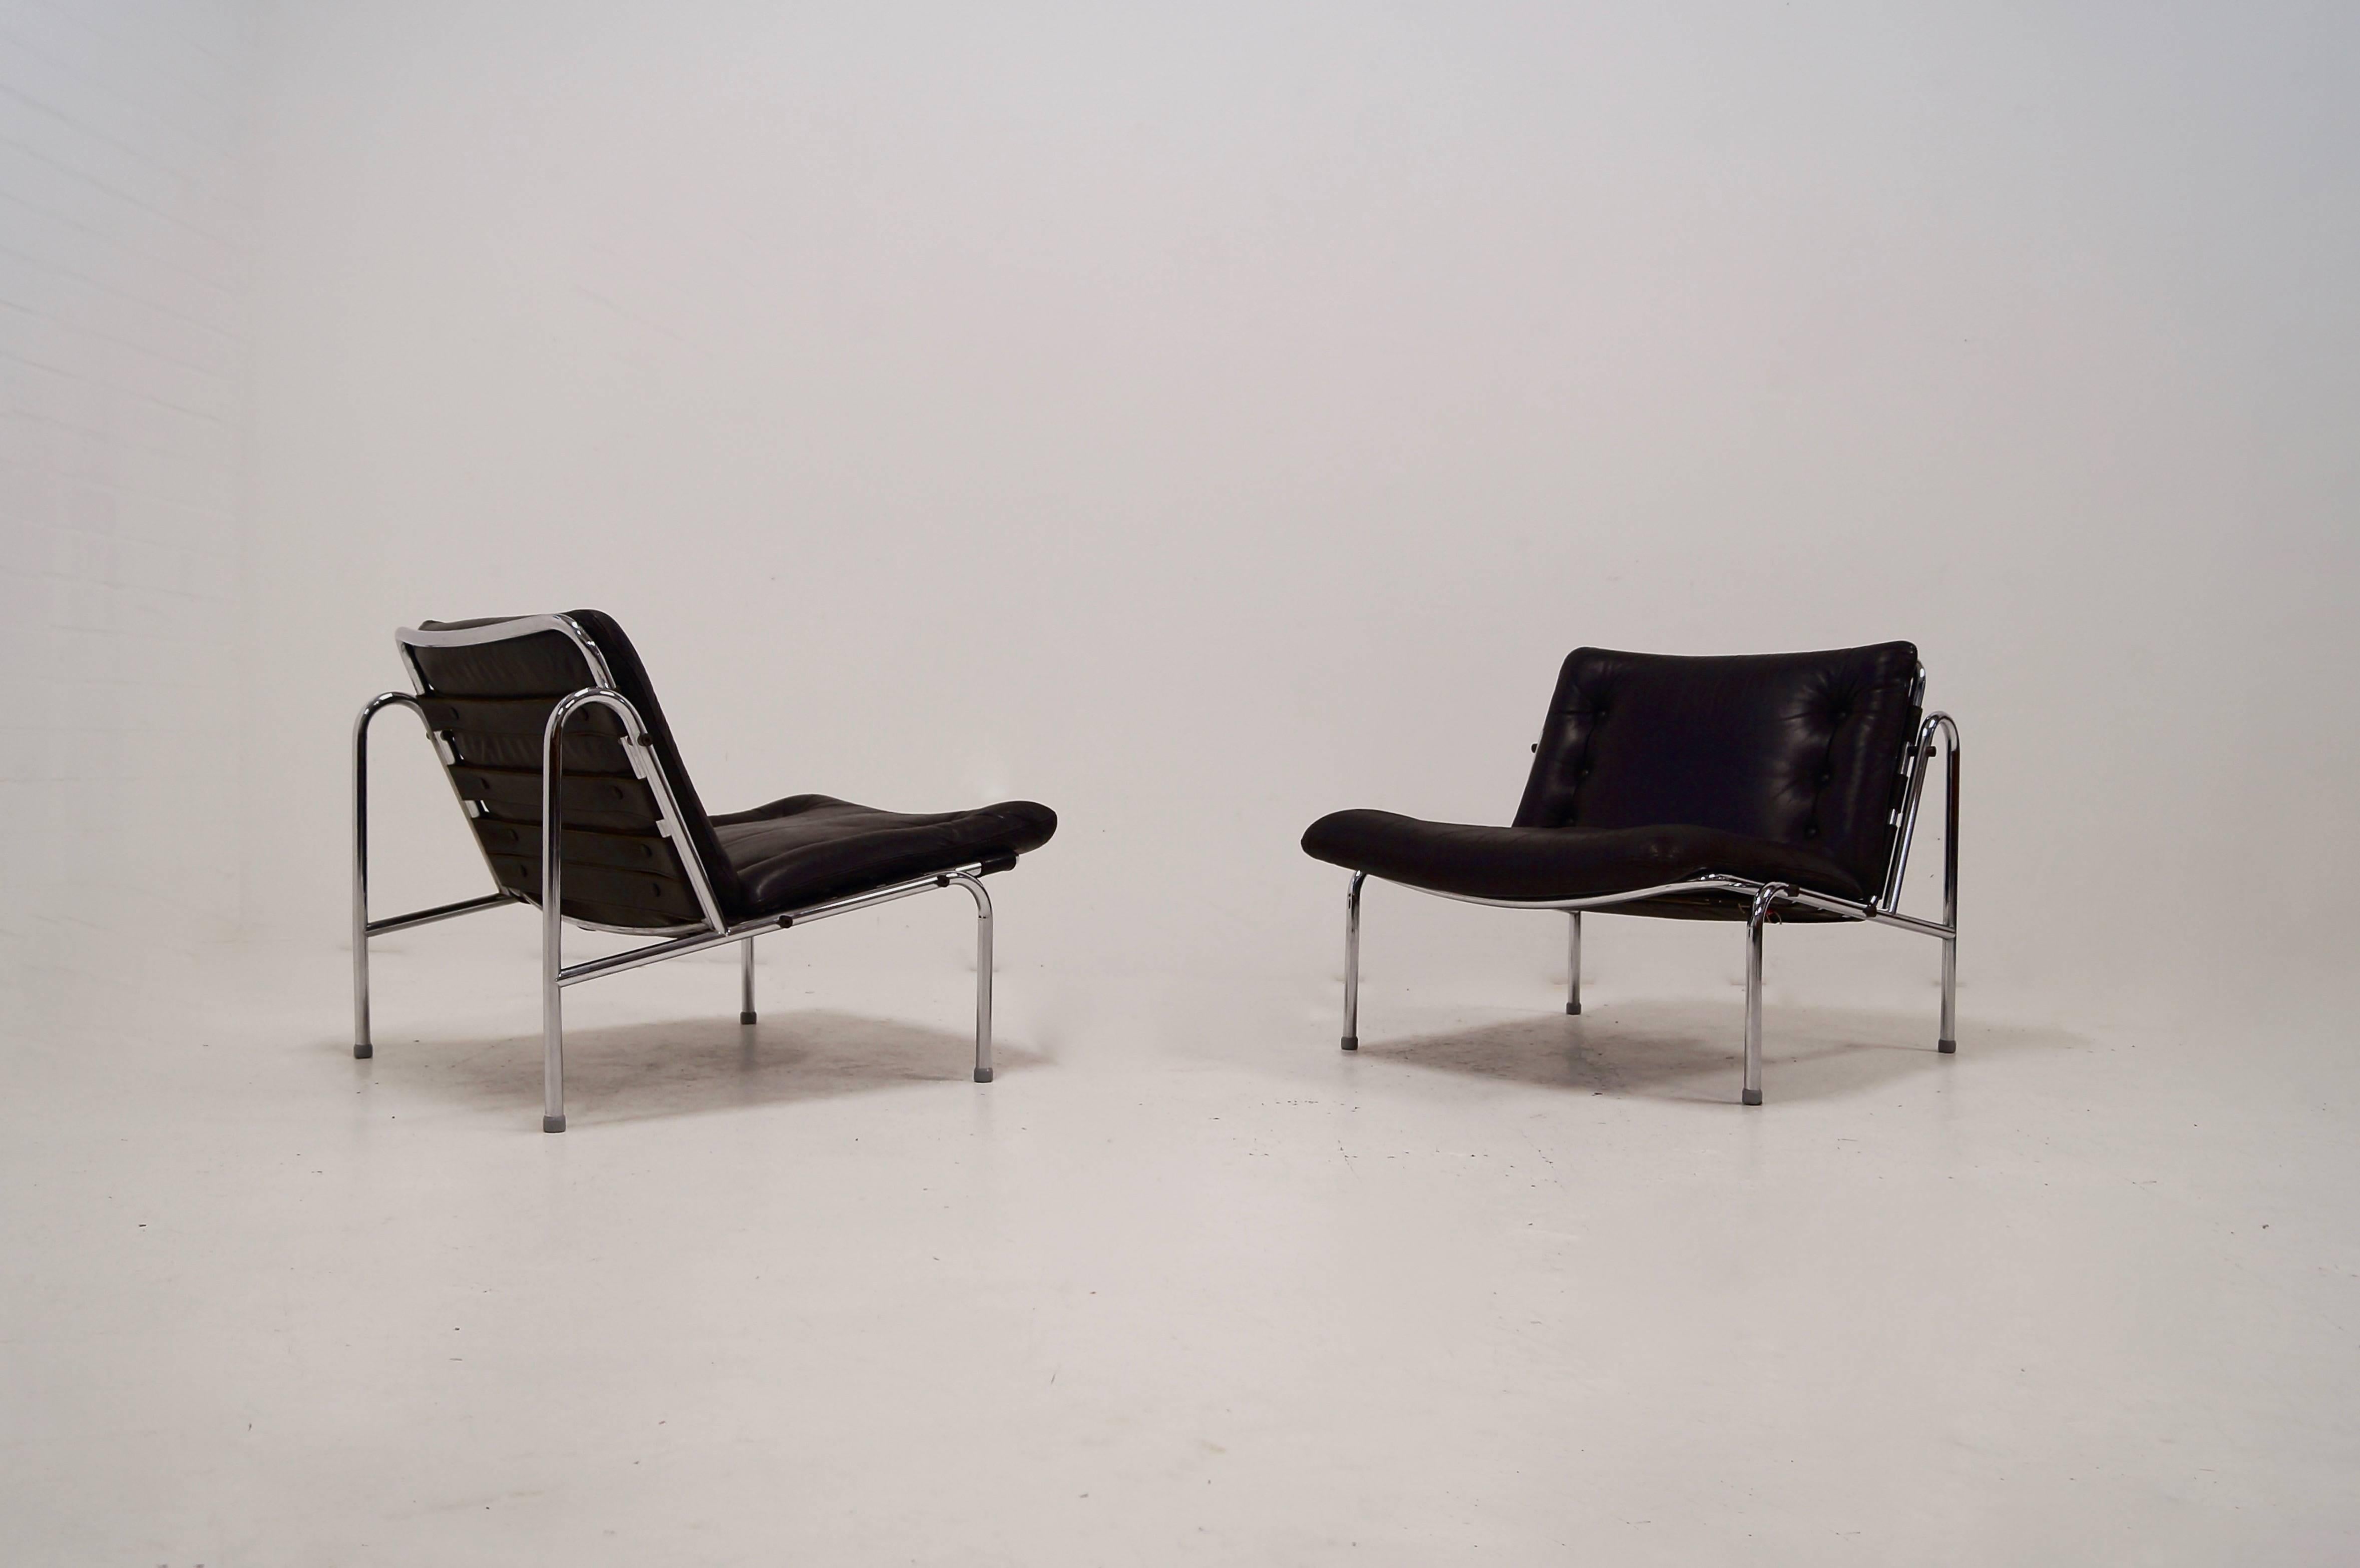 Pair of Kyoto SZ07 lounge chairs designed by Martin Visser and manufactured by t Spectrum in 1969. They have a heavy chrome plated tubular frame with black leather upholstery. 
The 'Kyoto' chair is part of the 'Osaka series' designed for the world